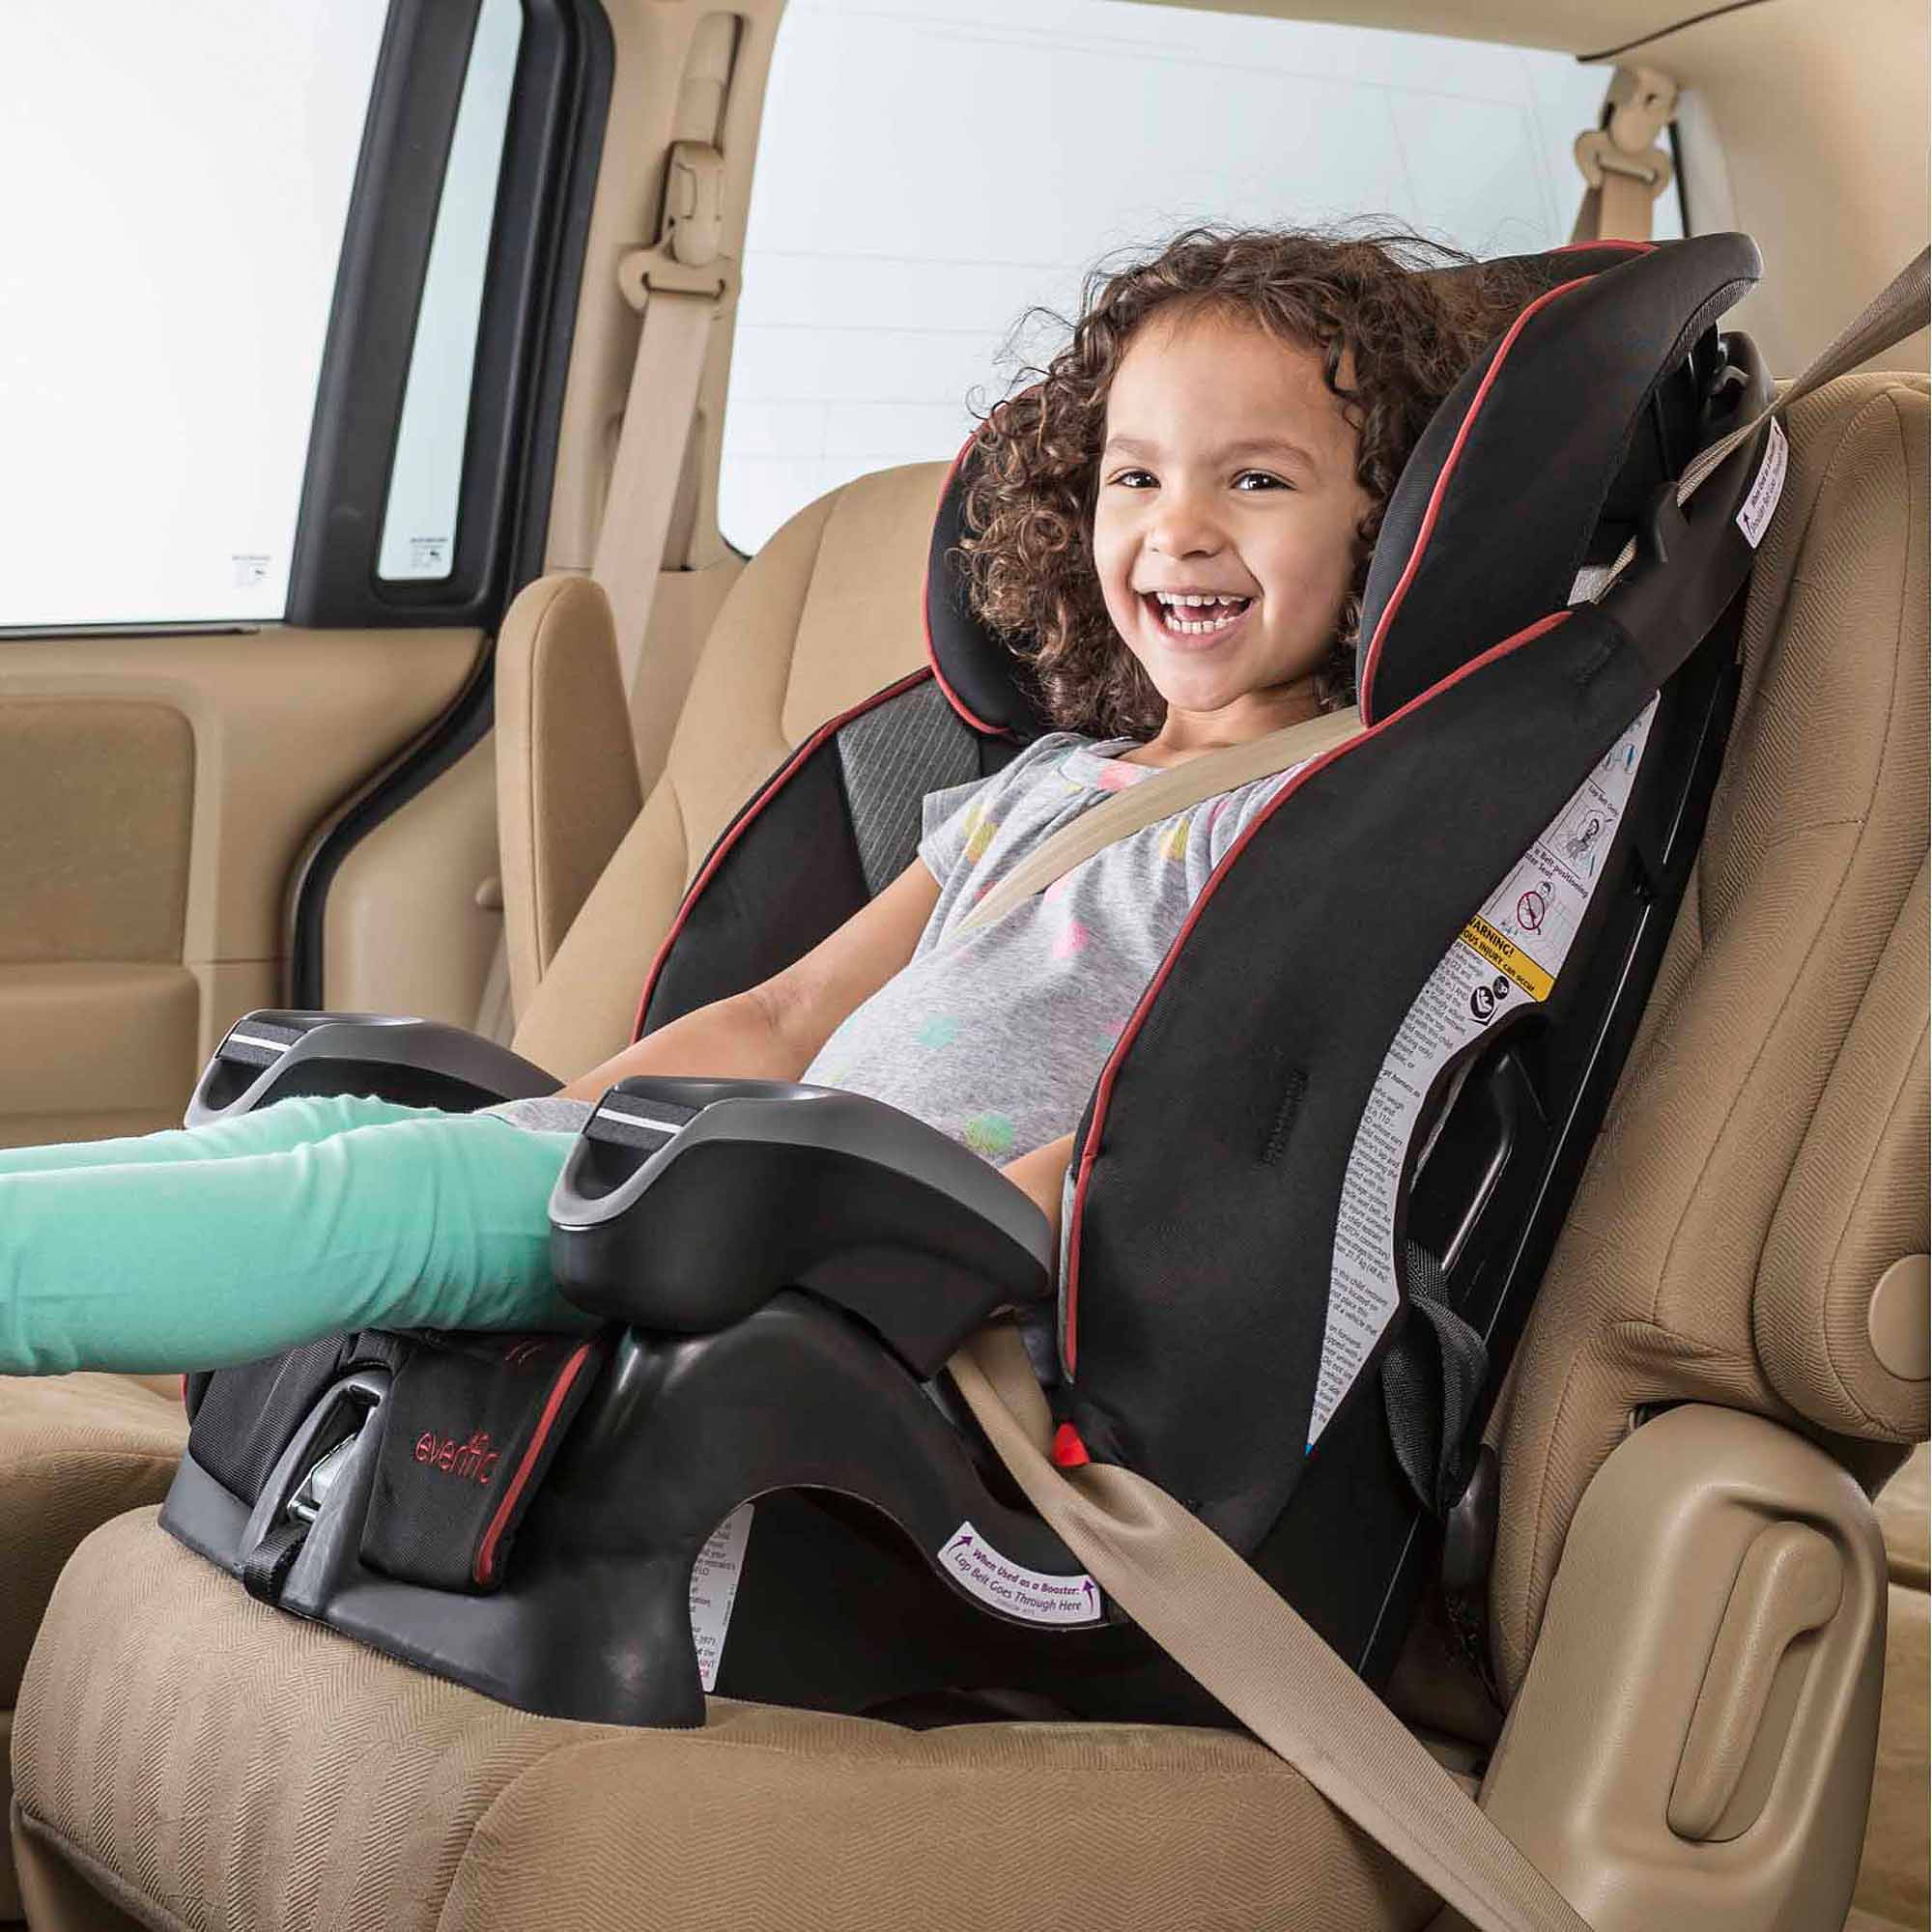 Evenflo Maestro Harness Booster Car Seat, choose your color - image 3 of 6